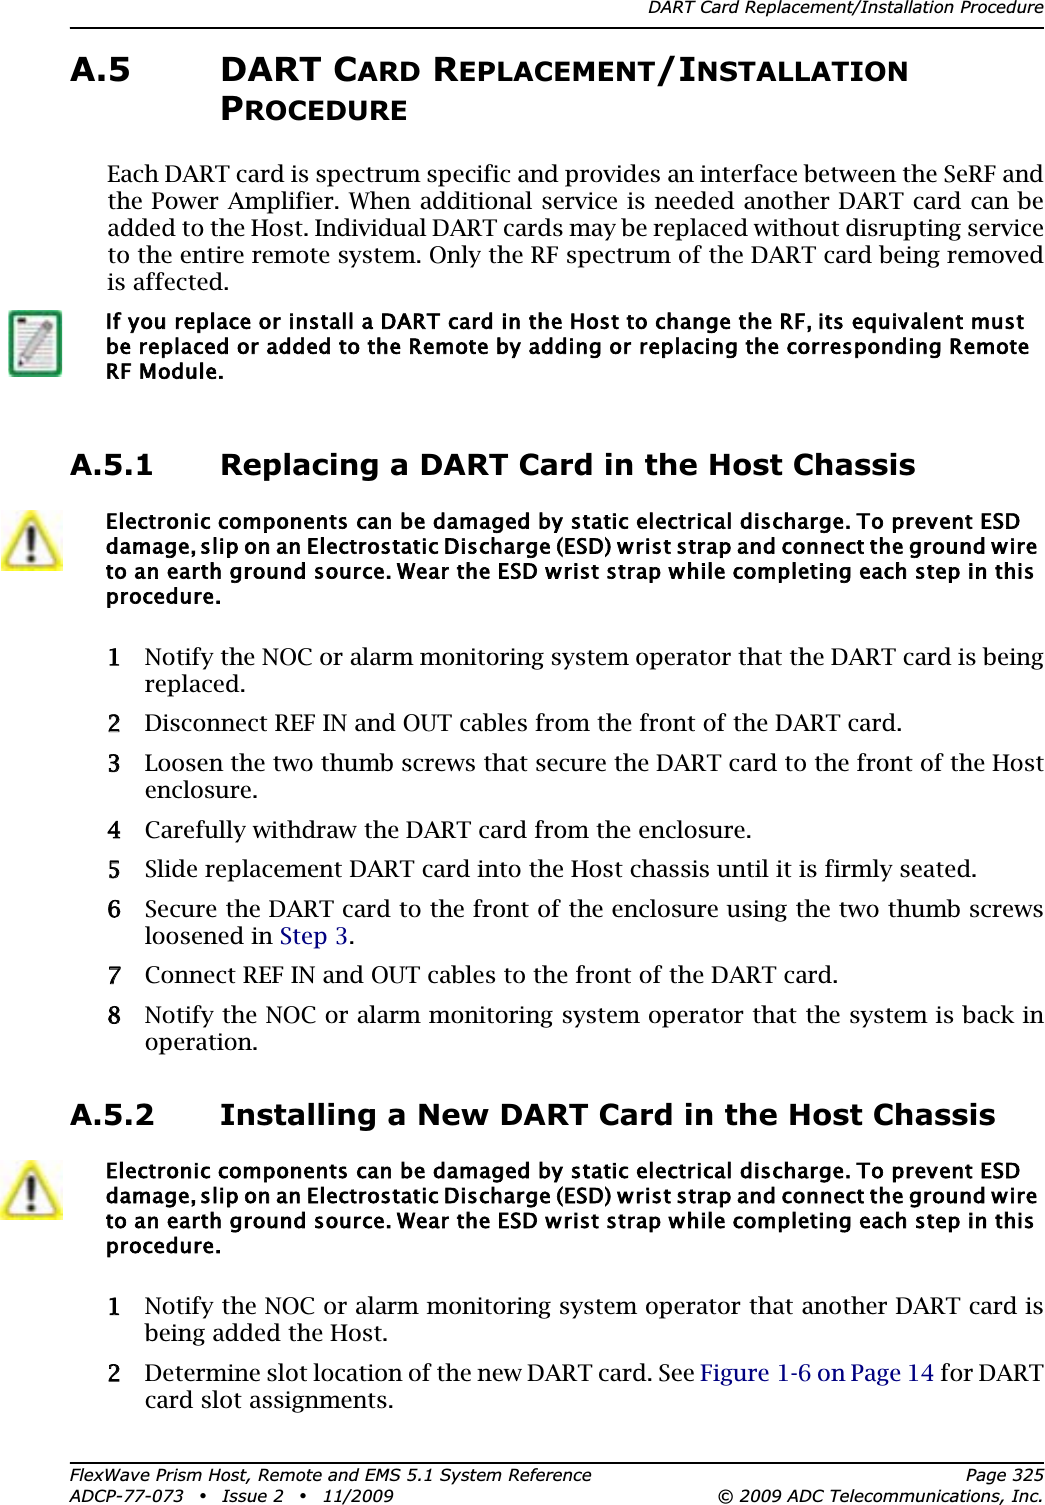 DART Card Replacement/Installation ProcedureFlexWave Prism Host, Remote and EMS 5.1 System Reference Page 325ADCP-77-073 • Issue 2 • 11/2009 © 2009 ADC Telecommunications, Inc.A.5 DART CARD REPLACEMENT/INSTALLATIONPROCEDUREEach DART card is spectrum specific and provides an interface between the SeRF and the Power Amplifier. When additional service is needed another DART card can be added to the Host. Individual DART cards may be replaced without disrupting service to the entire remote system. Only the RF spectrum of the DART card being removed is affected.A.5.1 Replacing a DART Card in the Host Chassis11 Notify the NOC or alarm monitoring system operator that the DART card is being replaced.22 Disconnect REF IN and OUT cables from the front of the DART card.33 Loosen the two thumb screws that secure the DART card to the front of the Host enclosure.44 Carefully withdraw the DART card from the enclosure. 55 Slide replacement DART card into the Host chassis until it is firmly seated.66 Secure the DART card to the front of the enclosure using the two thumb screws loosened in Step 3.77 Connect REF IN and OUT cables to the front of the DART card.88 Notify the NOC or alarm monitoring system operator that the system is back in operation.A.5.2 Installing a New DART Card in the Host Chassis11 Notify the NOC or alarm monitoring system operator that another DART card is being added the Host.22 Determine slot location of the new DART card. See Figure 1-6 on Page 14 for DART card slot assignments.If you replace or install a DART card in the Host to change the RF, its equivalent must be replaced or added to the Remote by adding or replacing the corresponding Remote RF Module.Electronic components can be damaged by static electrical discharge. To prevent ESD damage, slip on an Electrostatic Discharge (ESD) wrist strap and connect the ground wire to an earth ground source. Wear the ESD wrist strap while completing each step in this procedure.Electronic components can be damaged by static electrical discharge. To prevent ESD damage, slip on an Electrostatic Discharge (ESD) wrist strap and connect the ground wire to an earth ground source. Wear the ESD wrist strap while completing each step in this procedure.